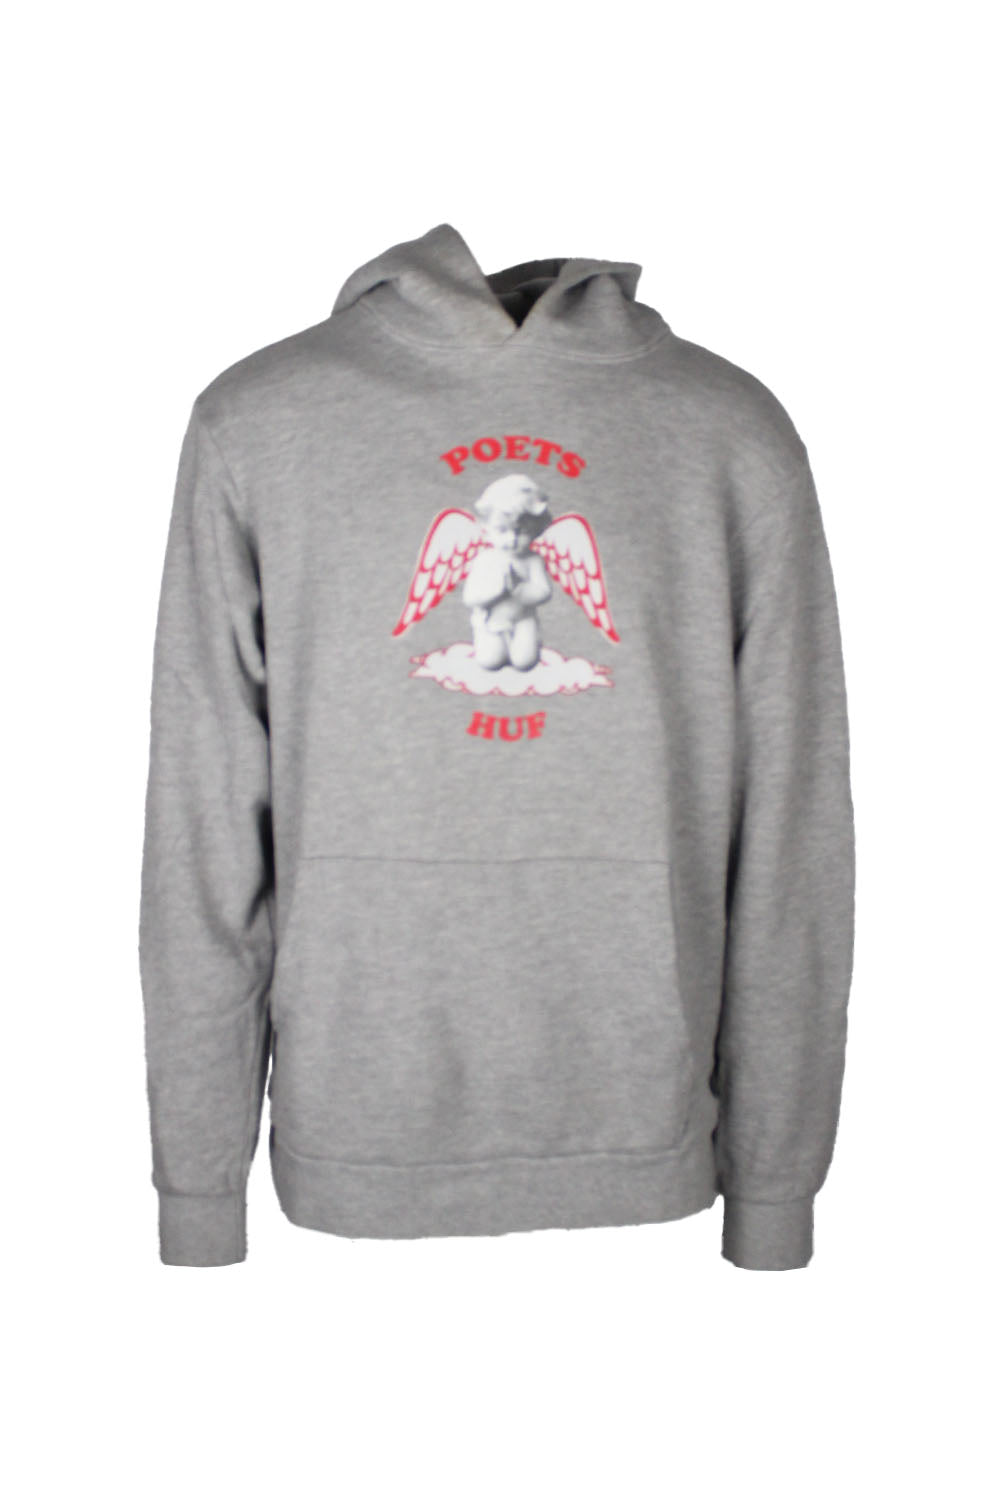 front view of huf x poets grey pullover hoodie. features ‘poets huf’ logo graphic printed at chest, ‘huf’ logo tab at left side above hem, front kangaroo pouch pocket, and ribbed cuffs/hem.